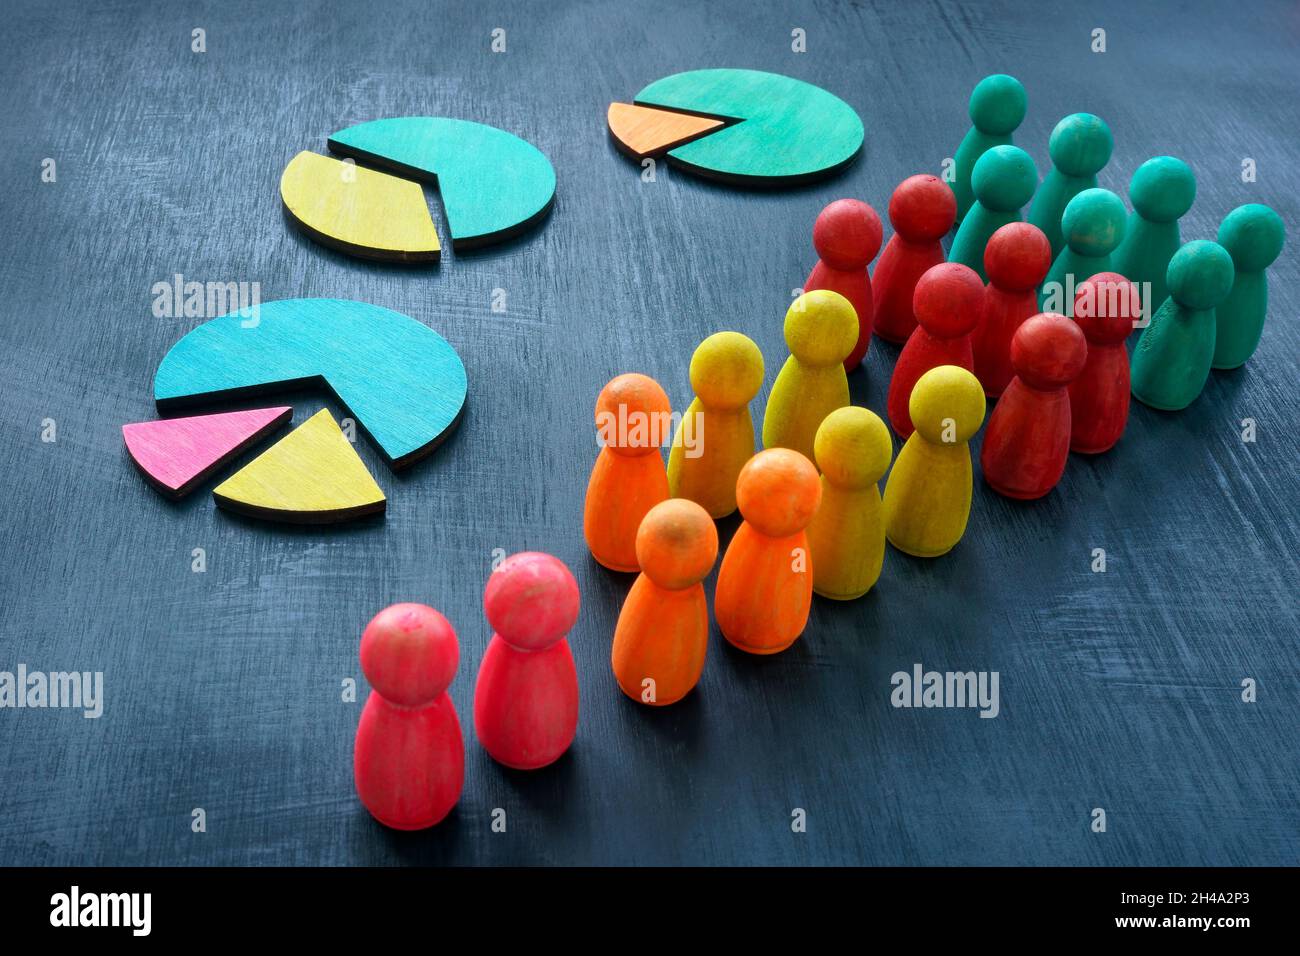 RFM Recency, Frequency Monetary segmentation concept. Charts and small figures. Stock Photo